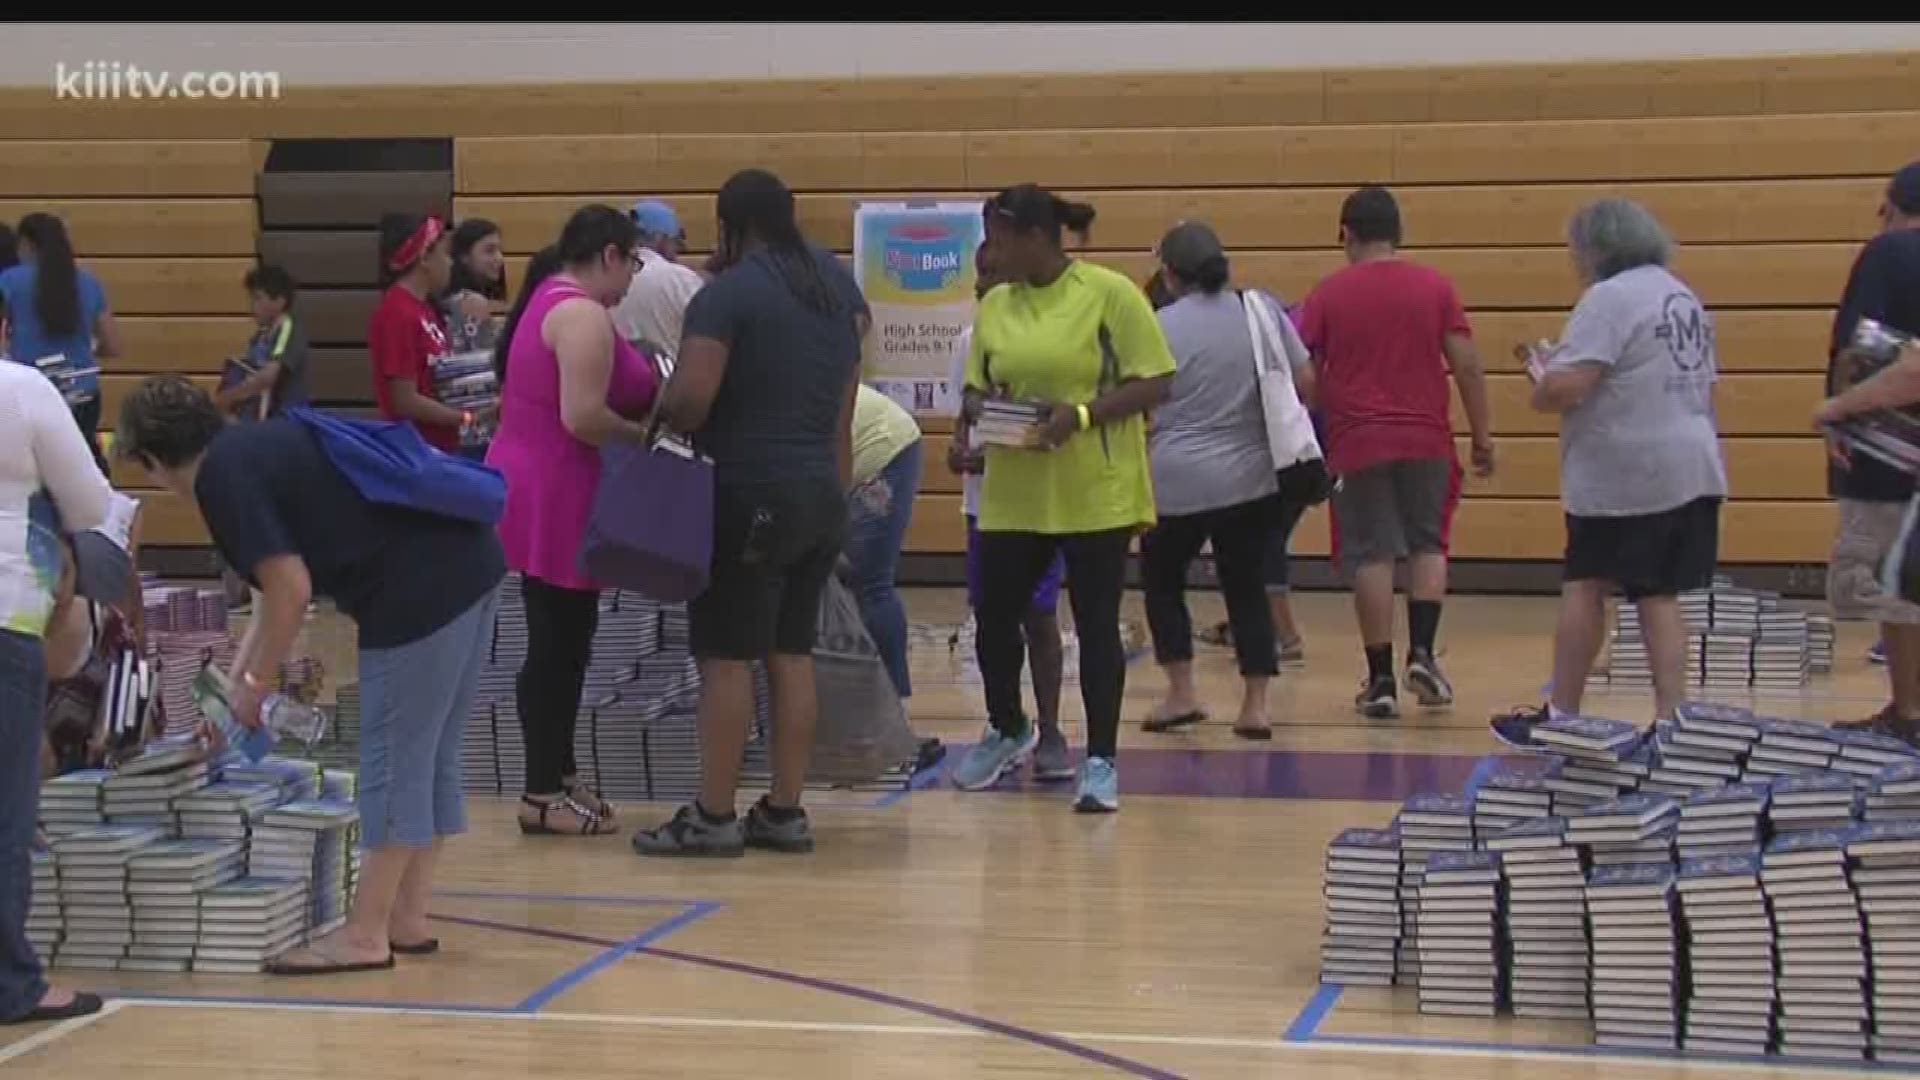 Miller High School hosting reading event open to the public. 40,000 books were up for grabs all for free!